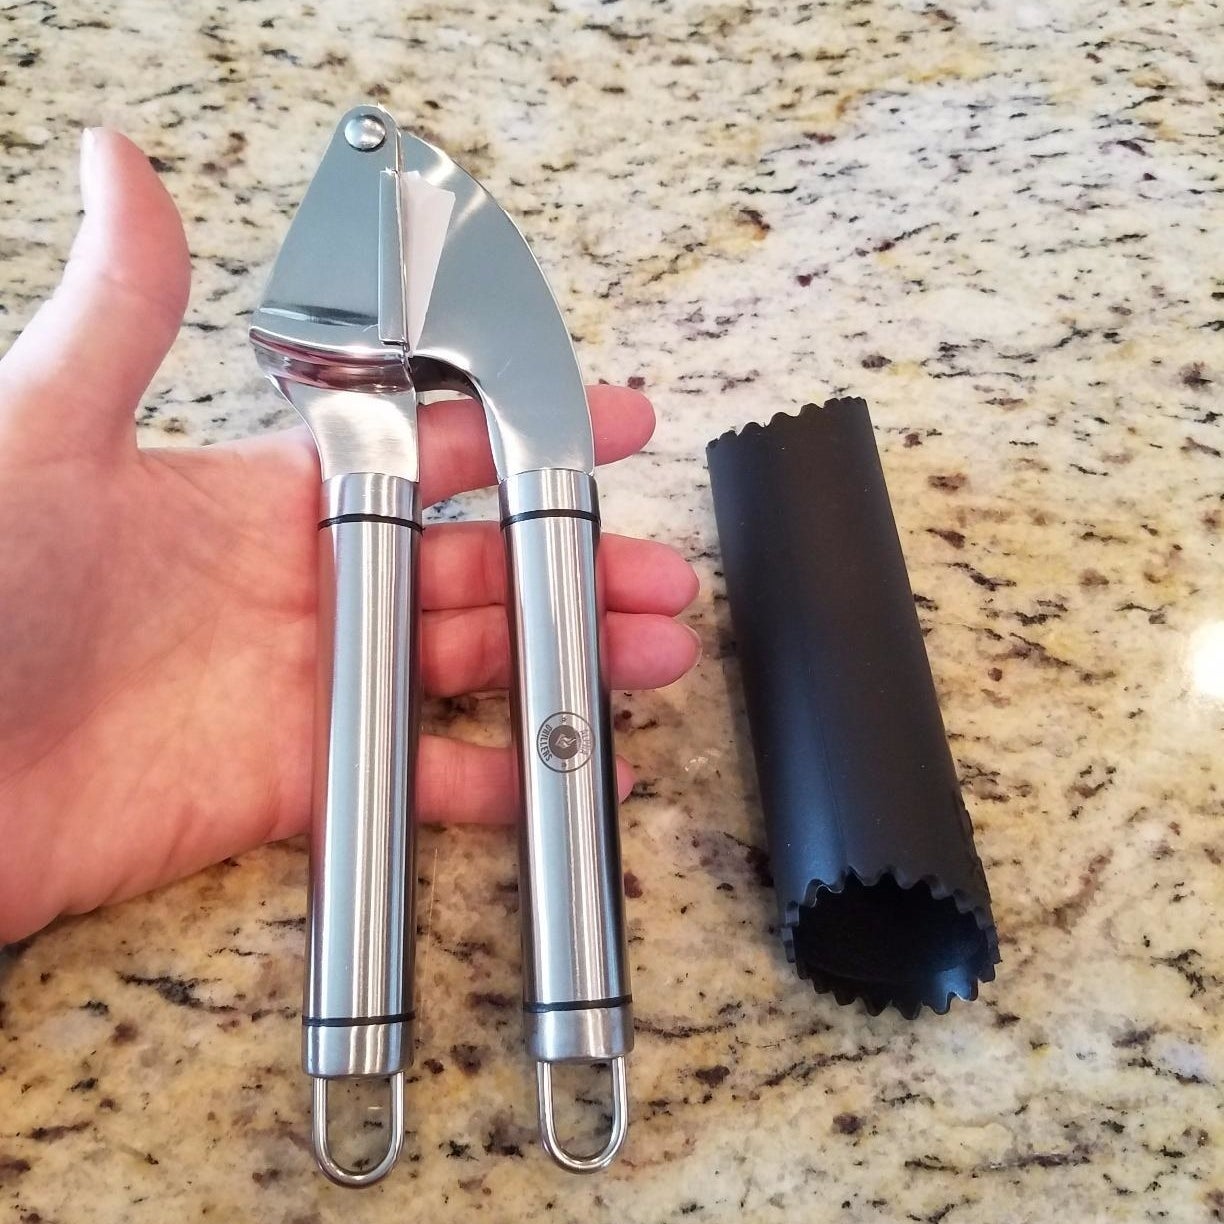 A reviewer holding the garlic press